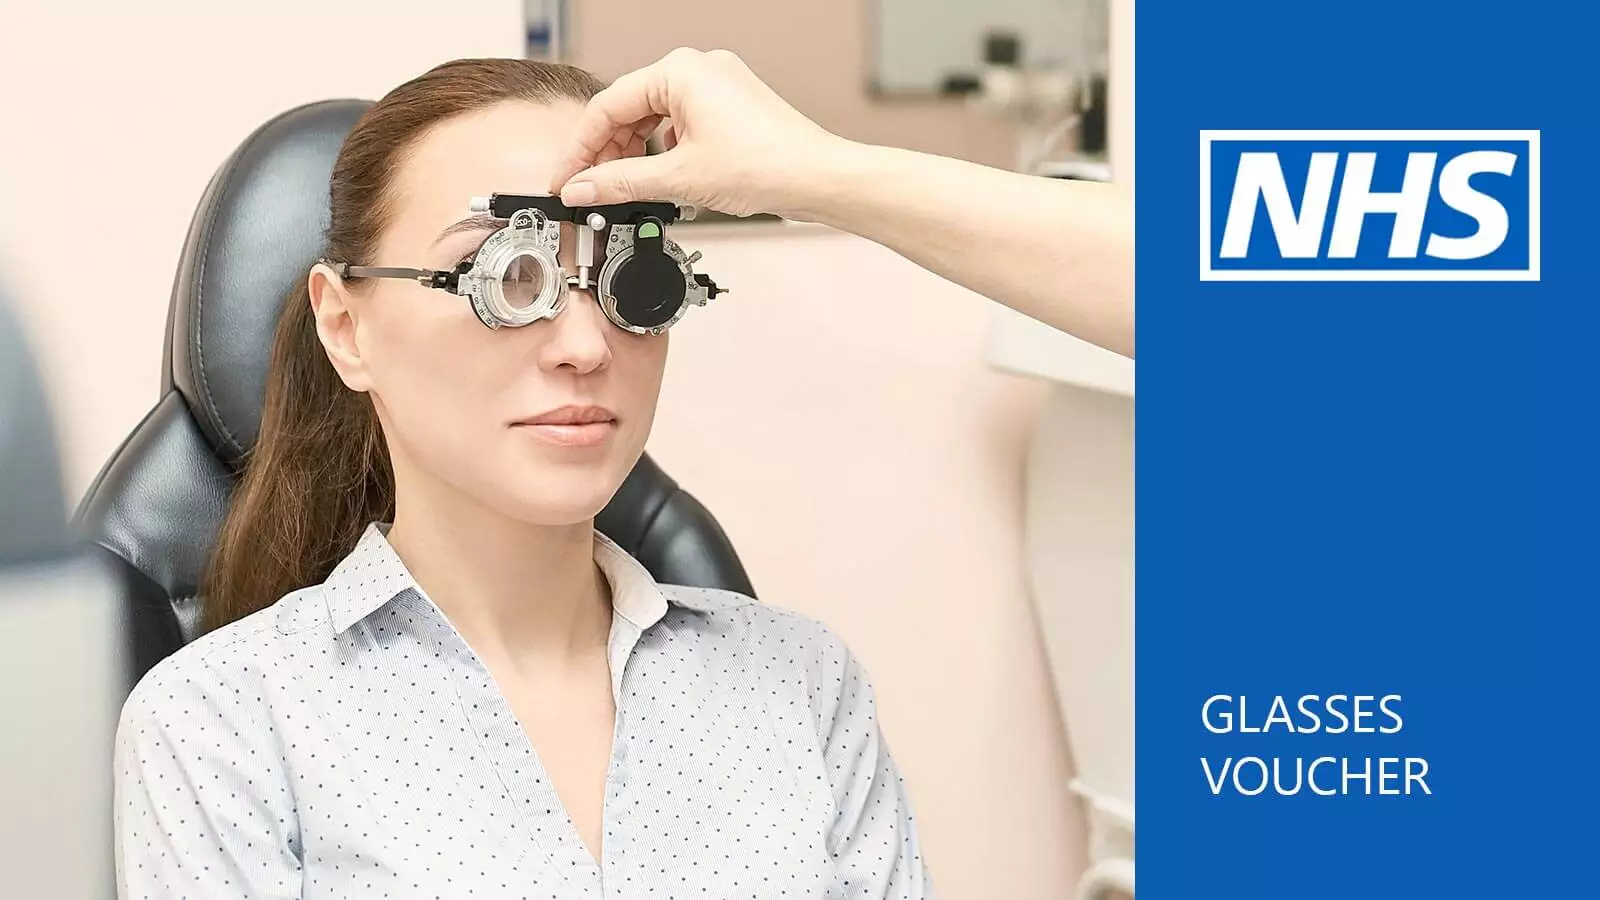 Is NHS Glasses Voucher Worthy and What's the Eligibility Criteria?